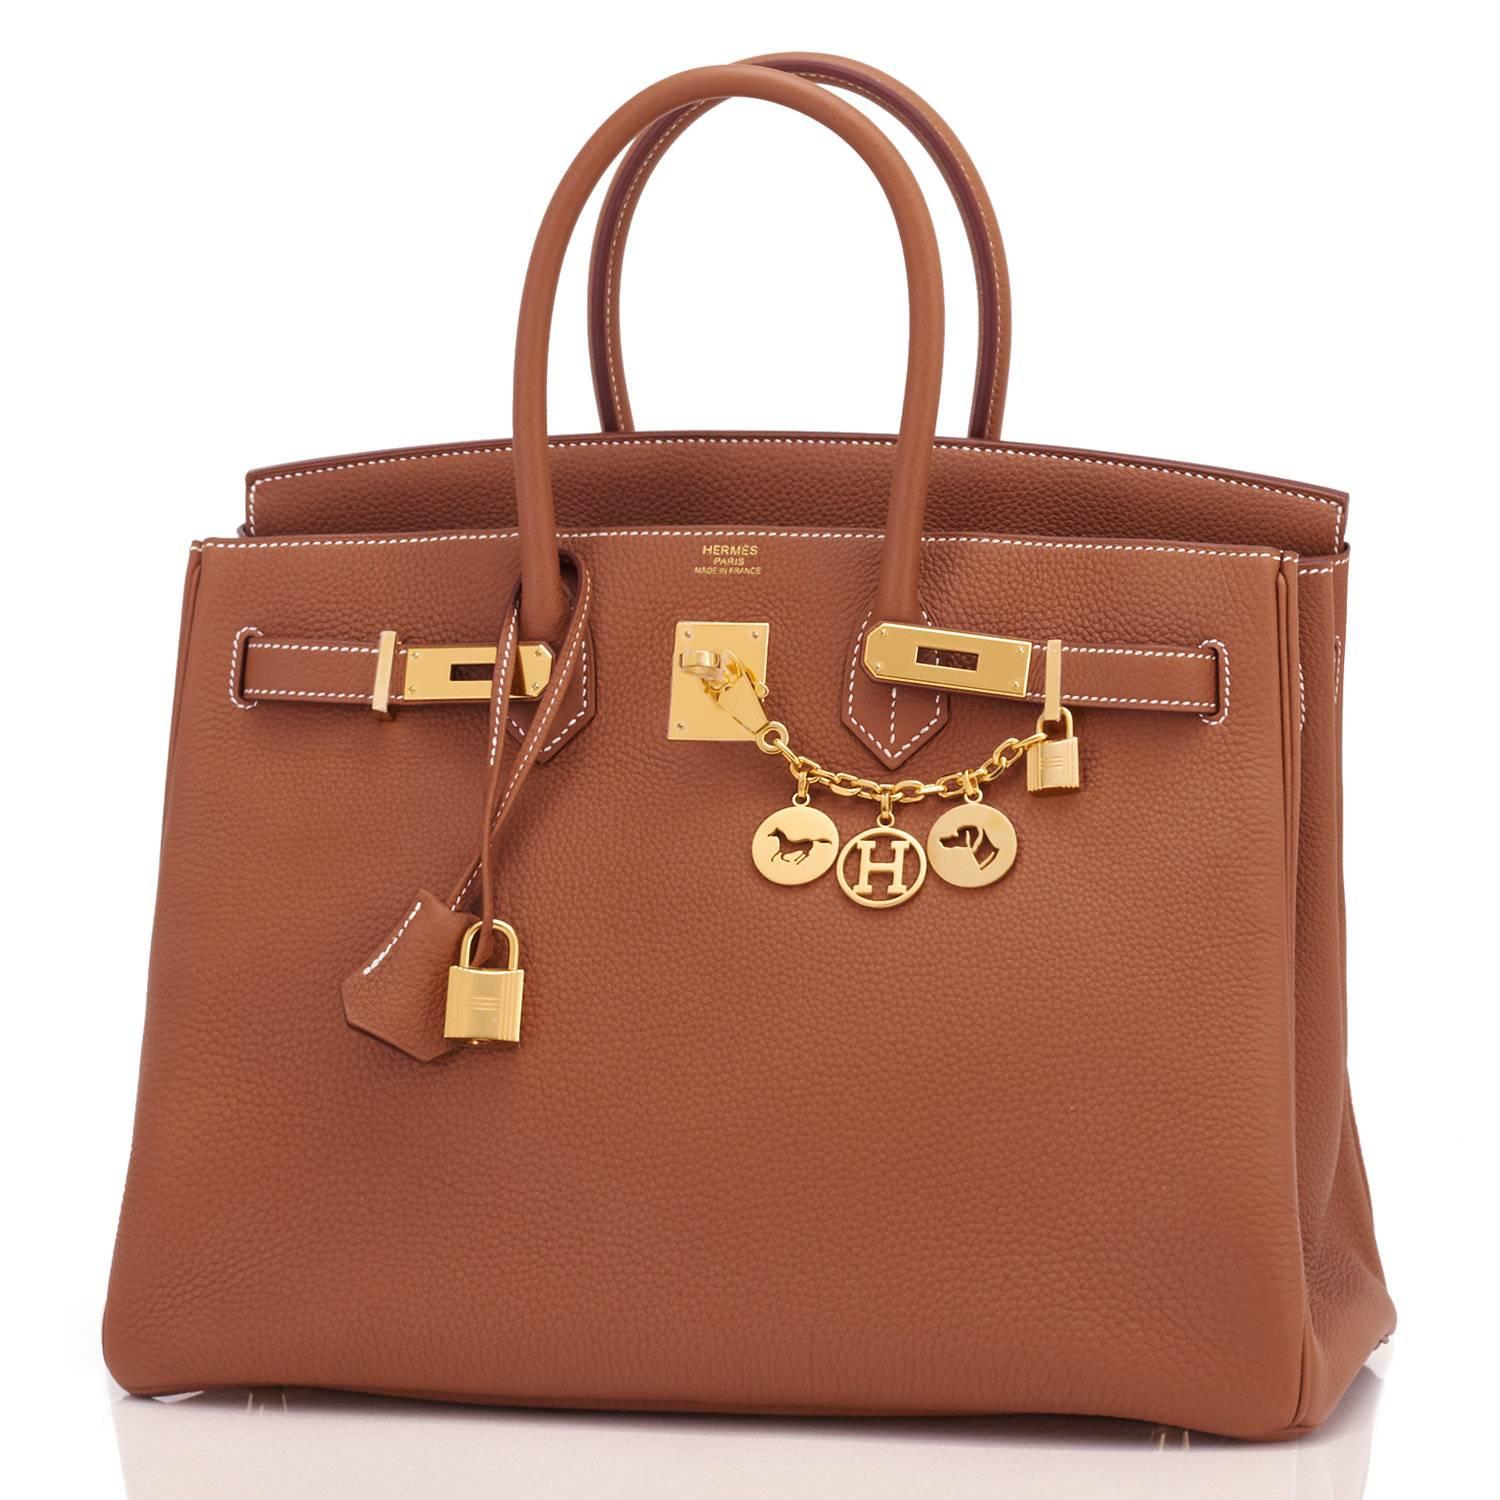 Hermes Gold Togo Camel Tan 35cm Birkin Gold Hardware A Stamp 
Brand New in Box. Store Fresh. Pristine Condition (with plastic on hardware). 
Just purchased from Hermes store; bag bears new interior A stamp.
Perfect gift! Comes with lock, keys,